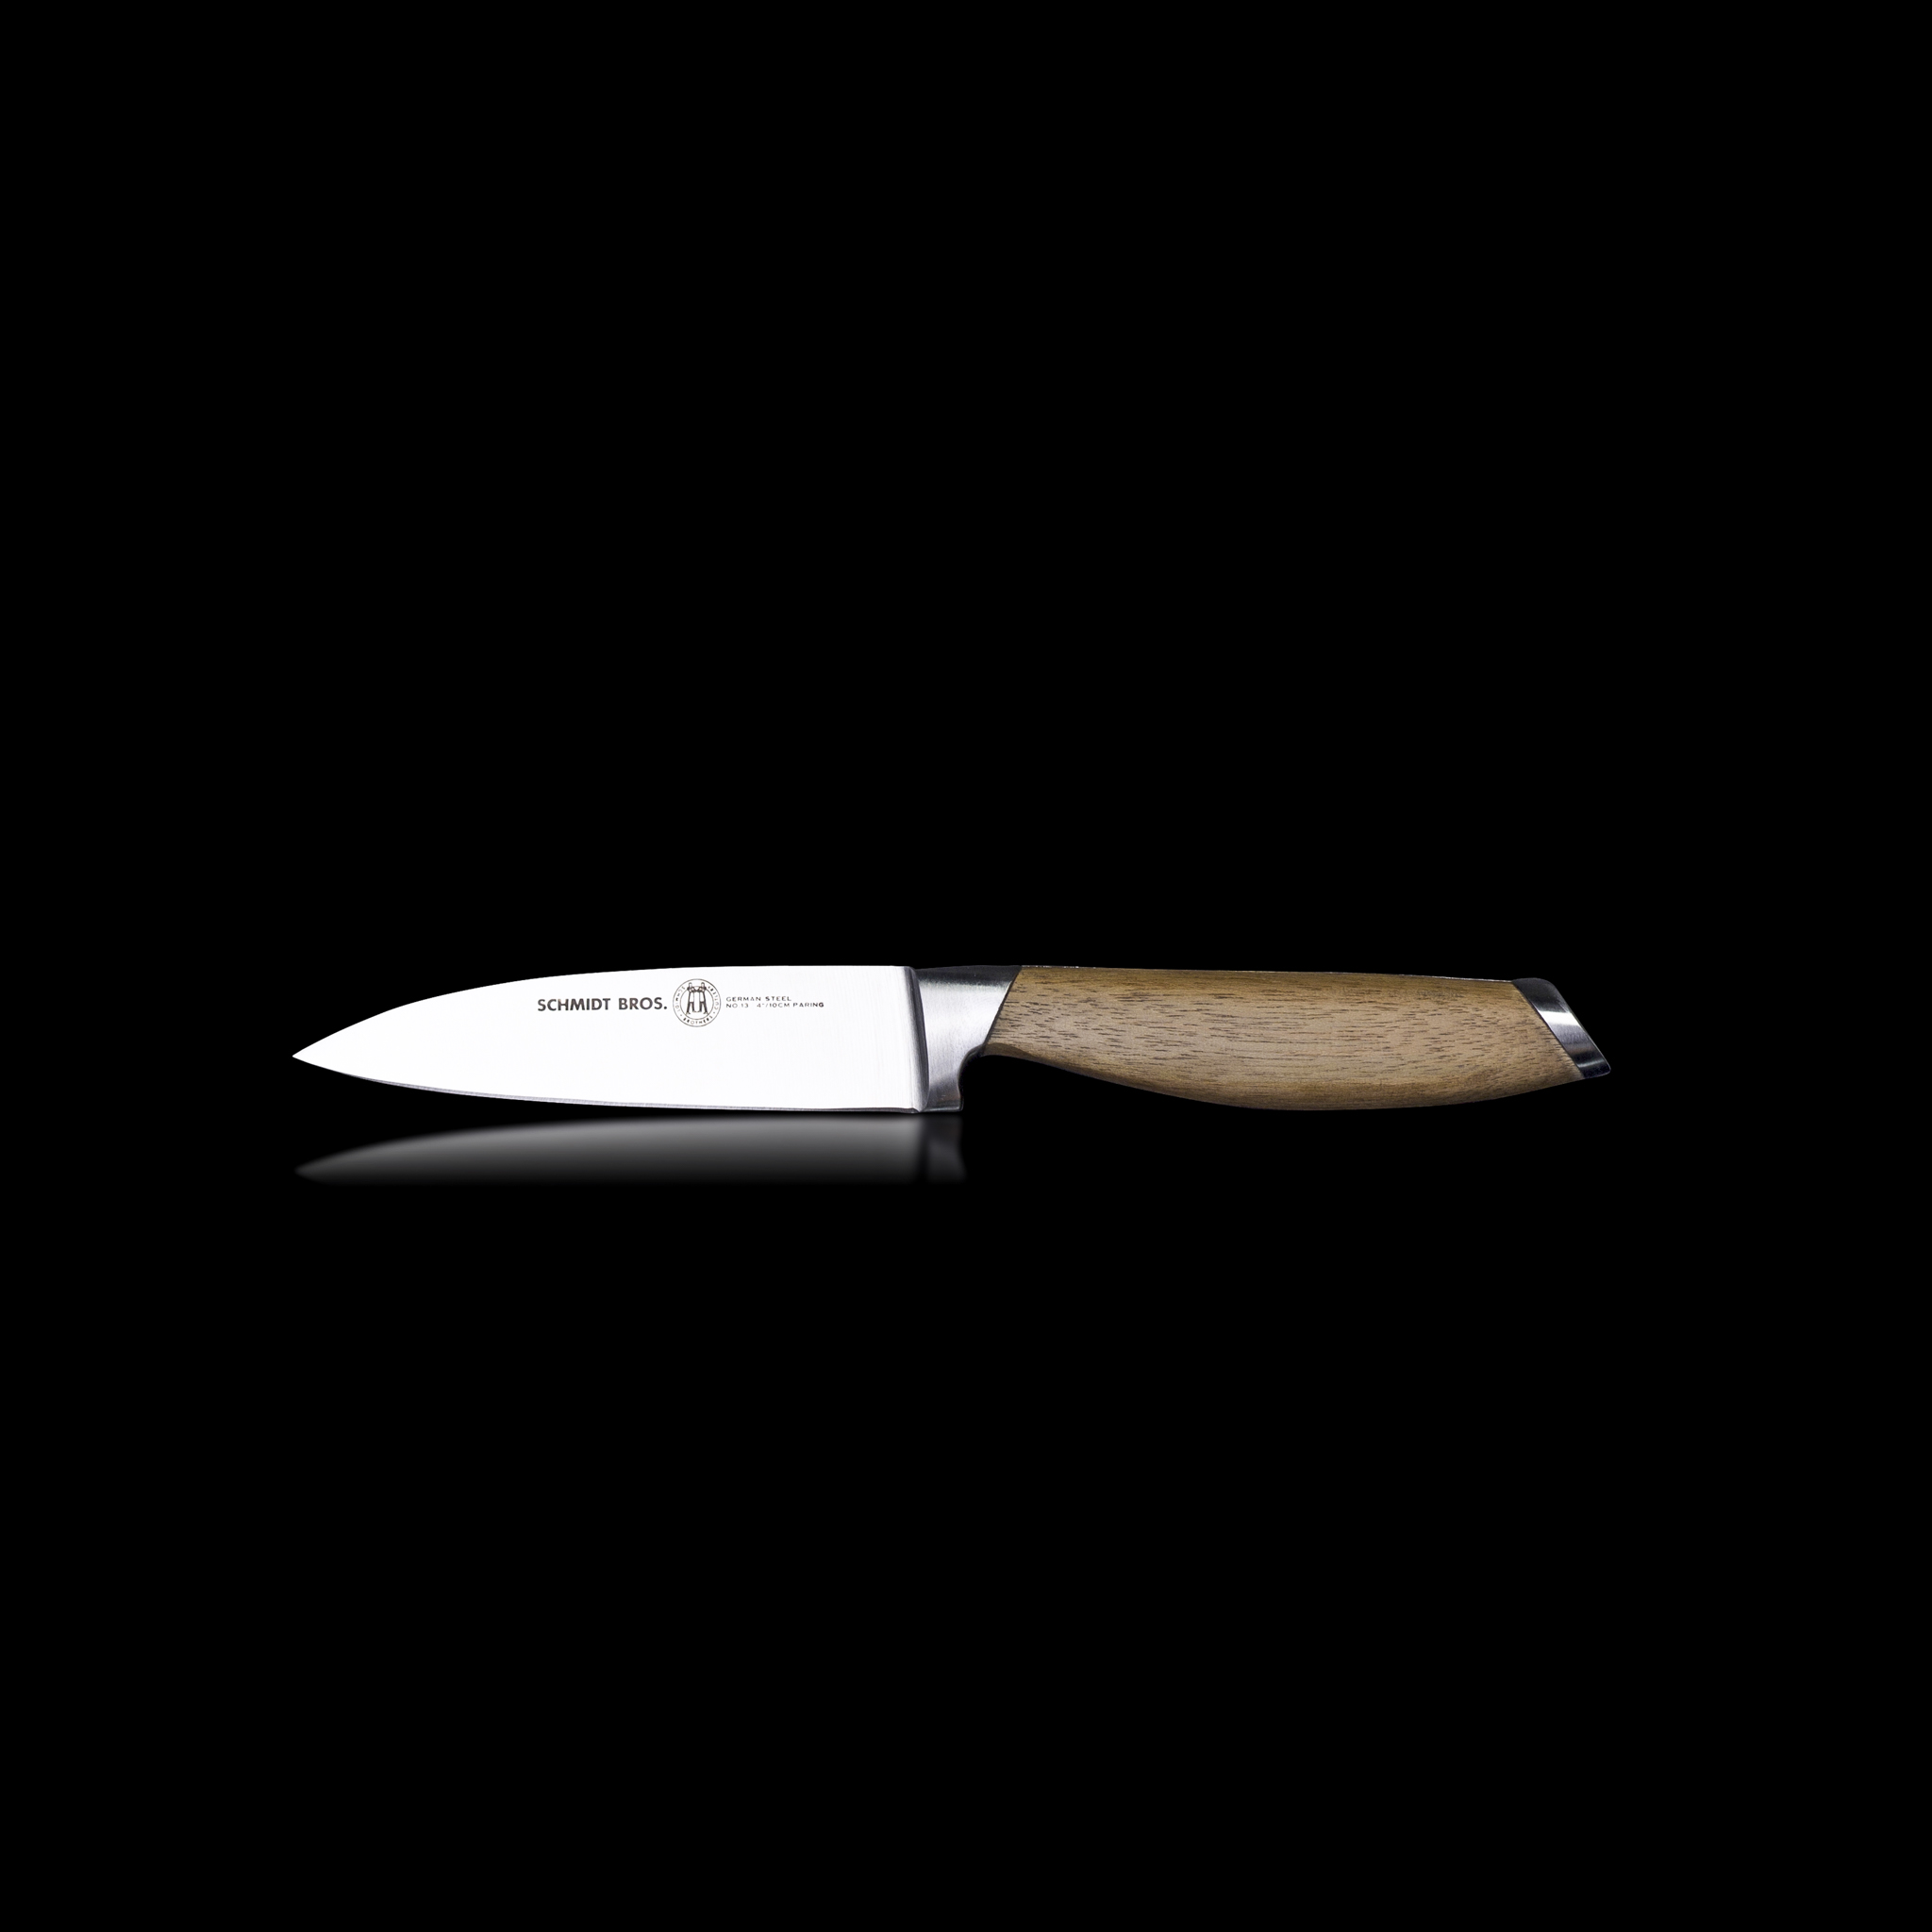 The Only 3 Knives You Need In Your Kitchen Arsenal